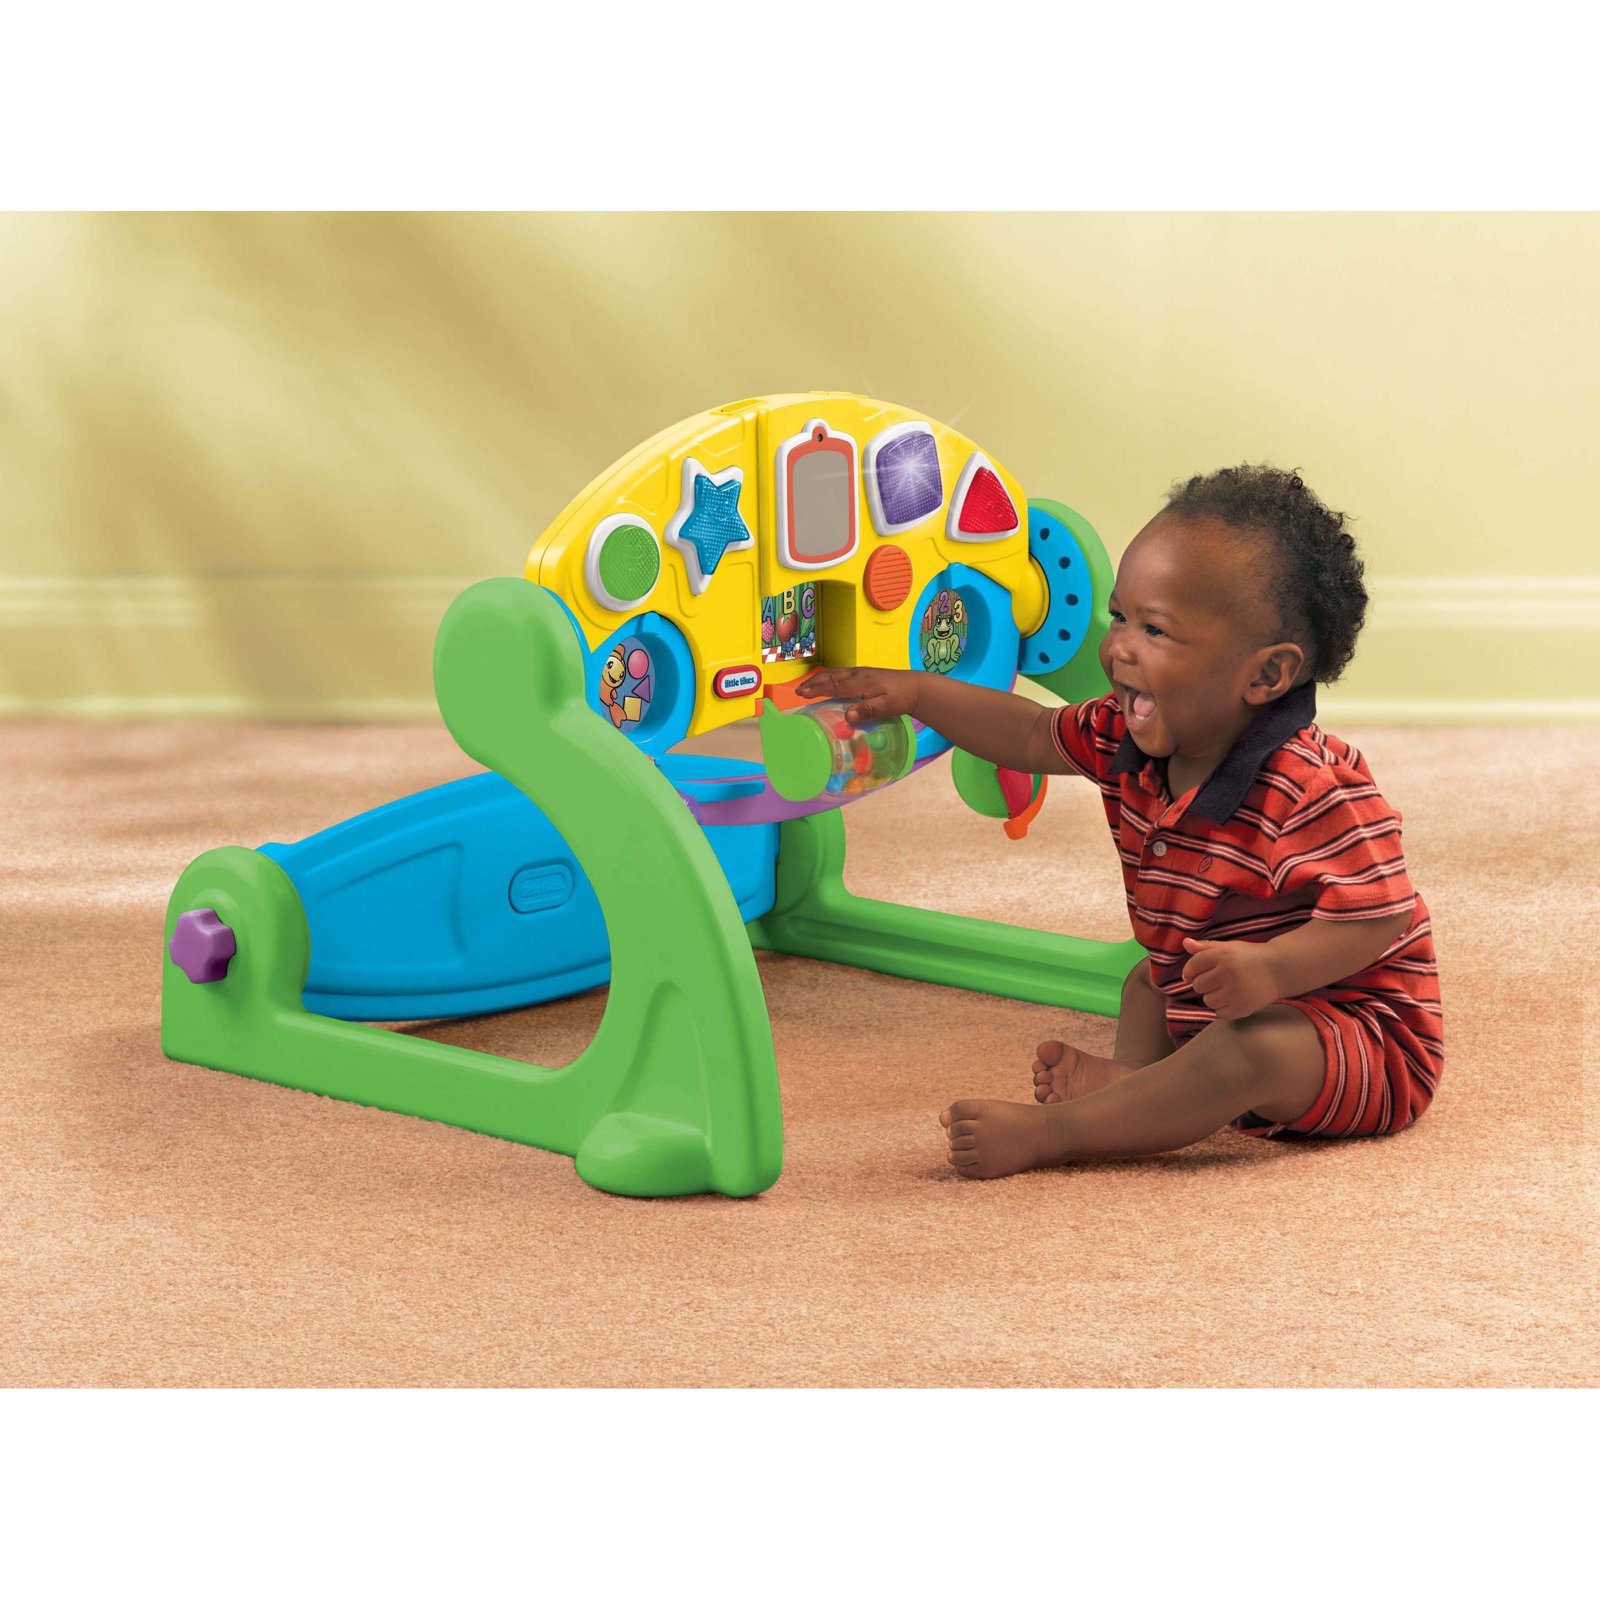 Little Tikes 5-In-1 Adjustable Gym - image 3 of 5